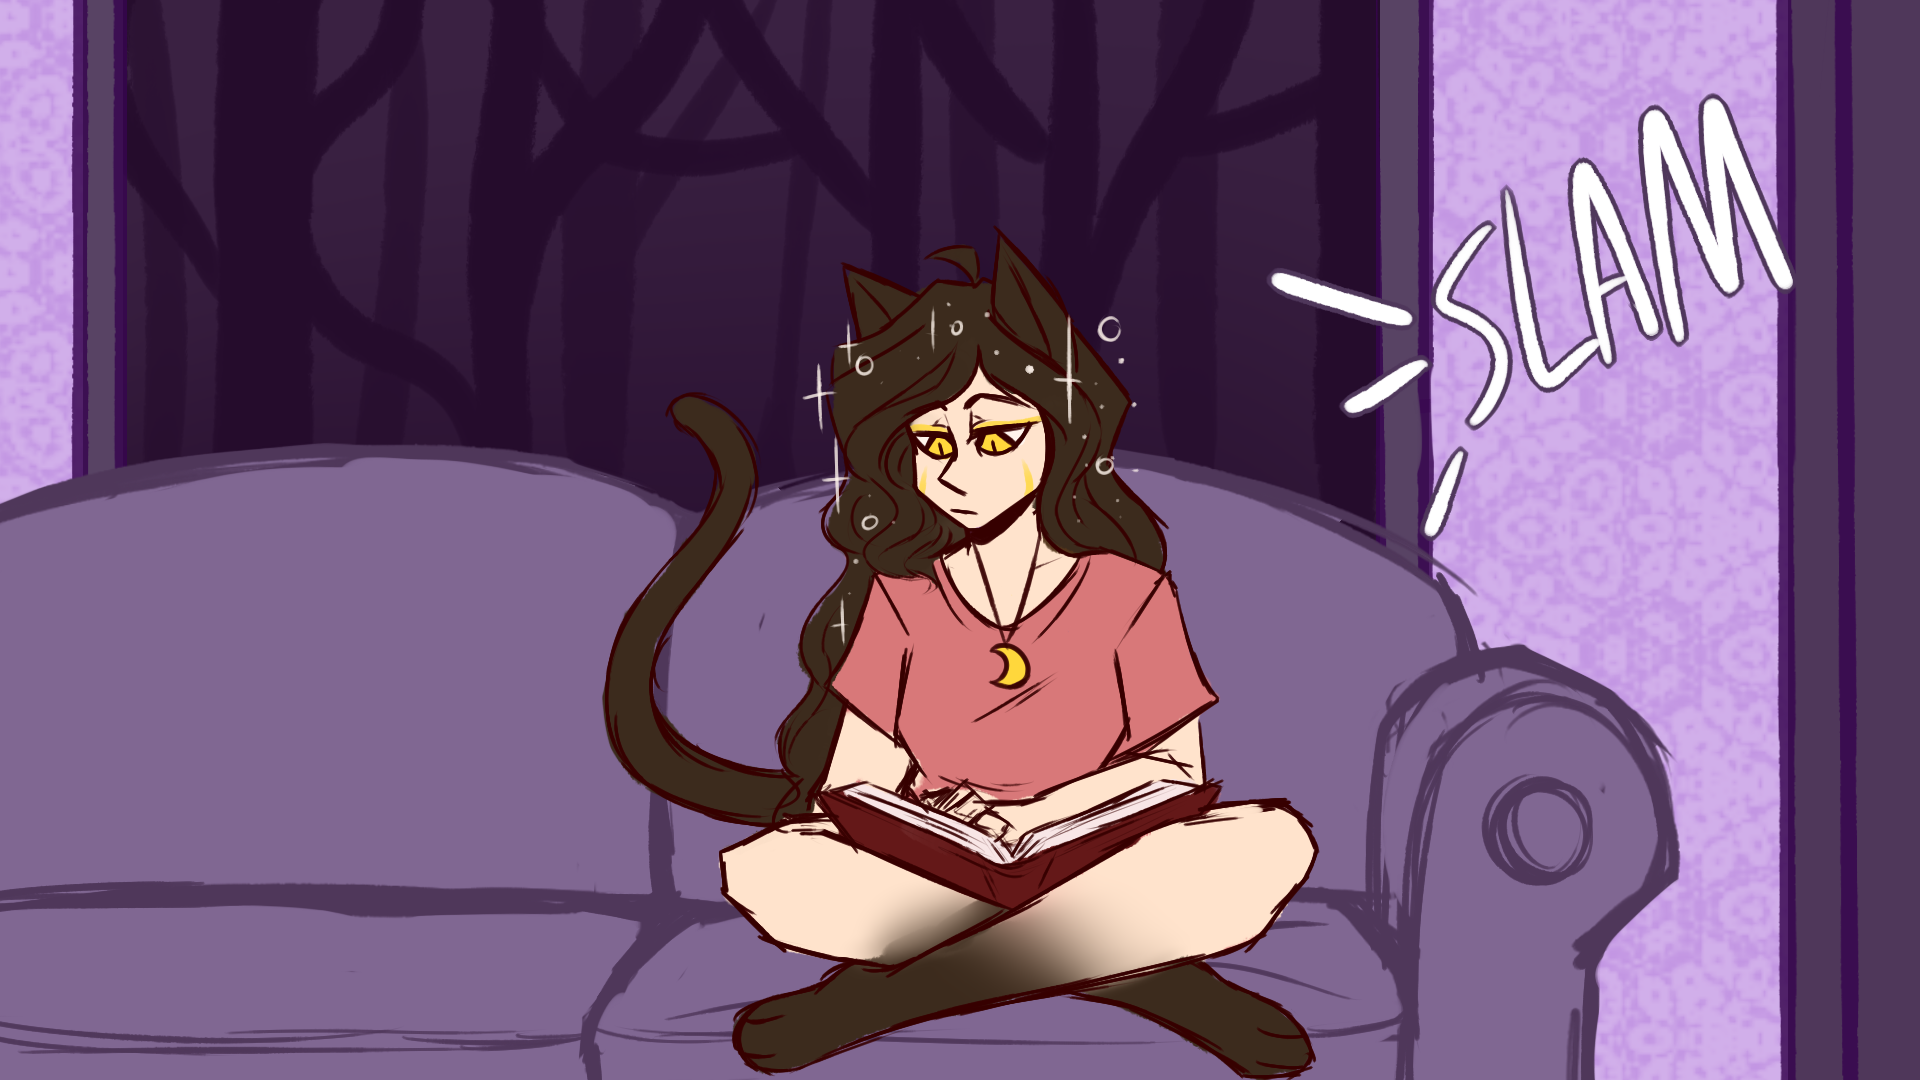 A catgirl named Luna is sitting on a sofa. She has long brunette hair, a tail, and ears the same color as her hair sitting on the couch. A moon pendant dangles from her necklace as she reads a book, while what appears to be a door "SLAM" comes from the image's right, Luna's left.